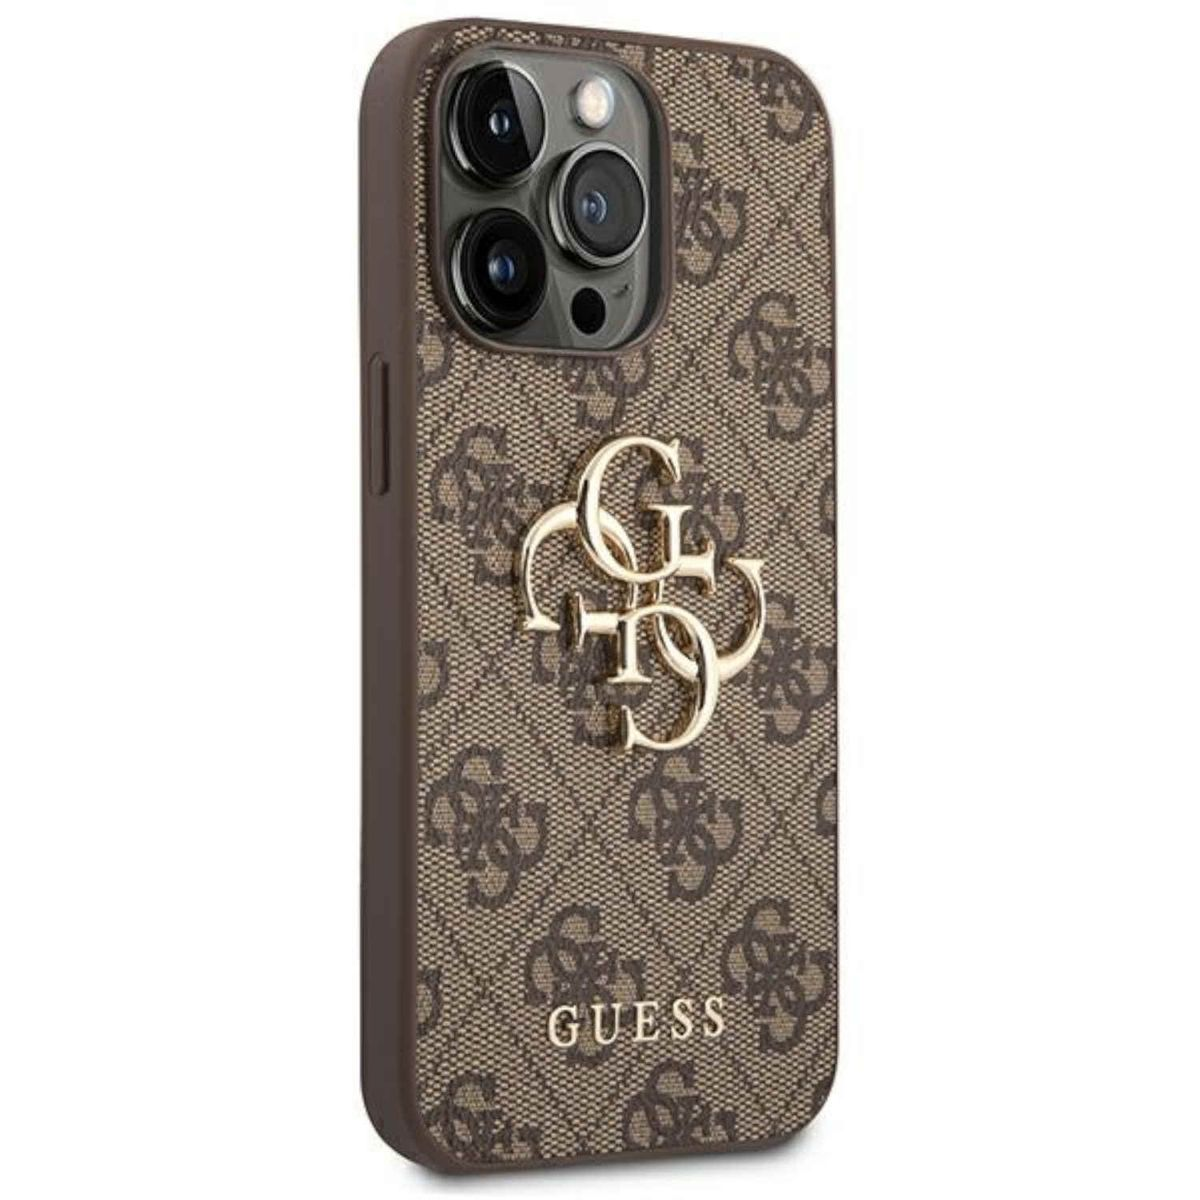 Apple, Pro 4G iPhone Max Big 14 Pro Angabe Backcover, Metal Max, GUESS 14 iPhone (Brown), Logo Case Keine